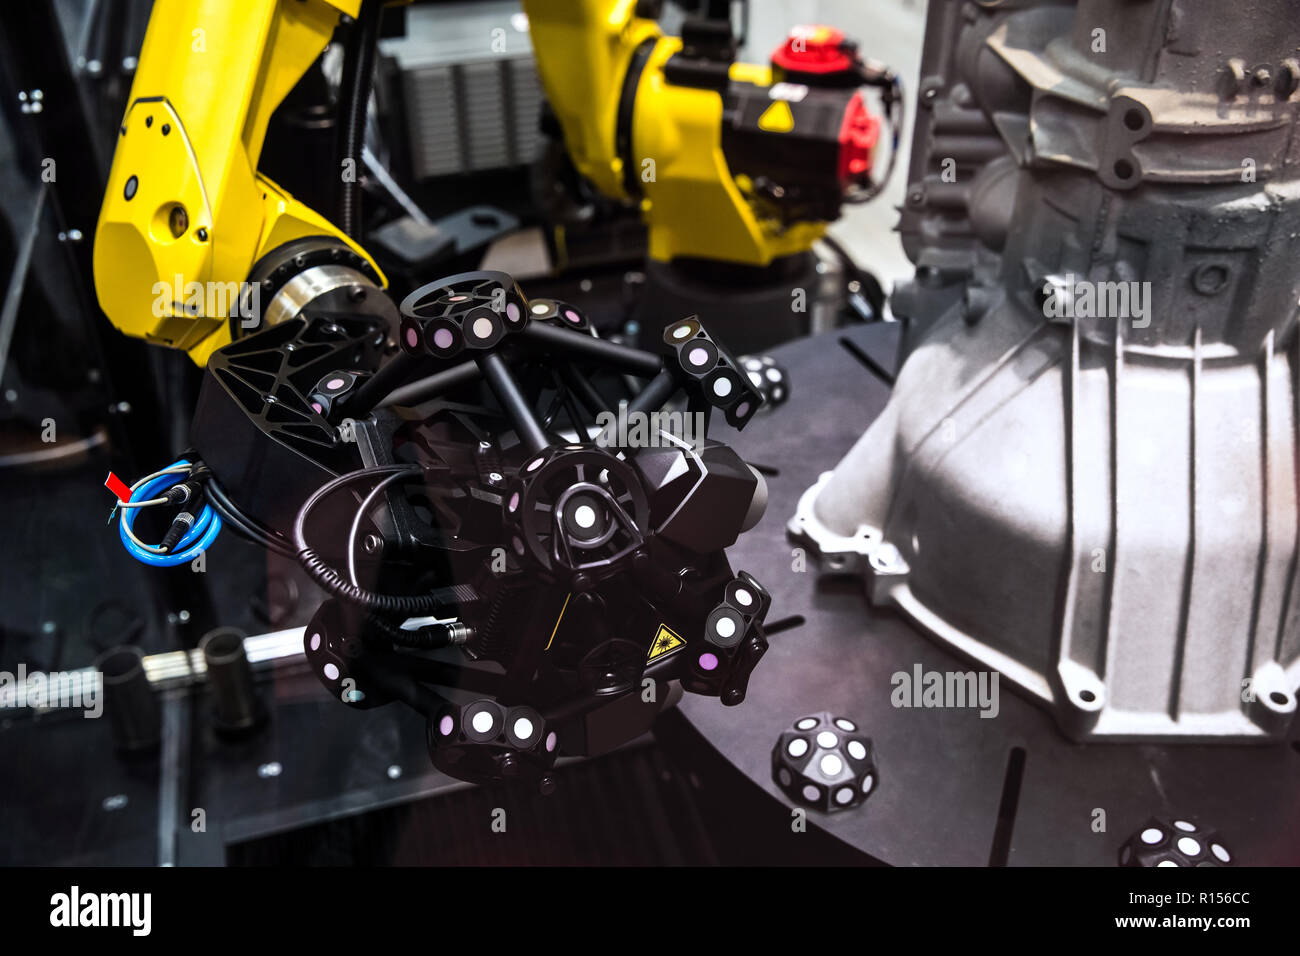 Robot arm with 3D optical CMM scanning system Stock Photo